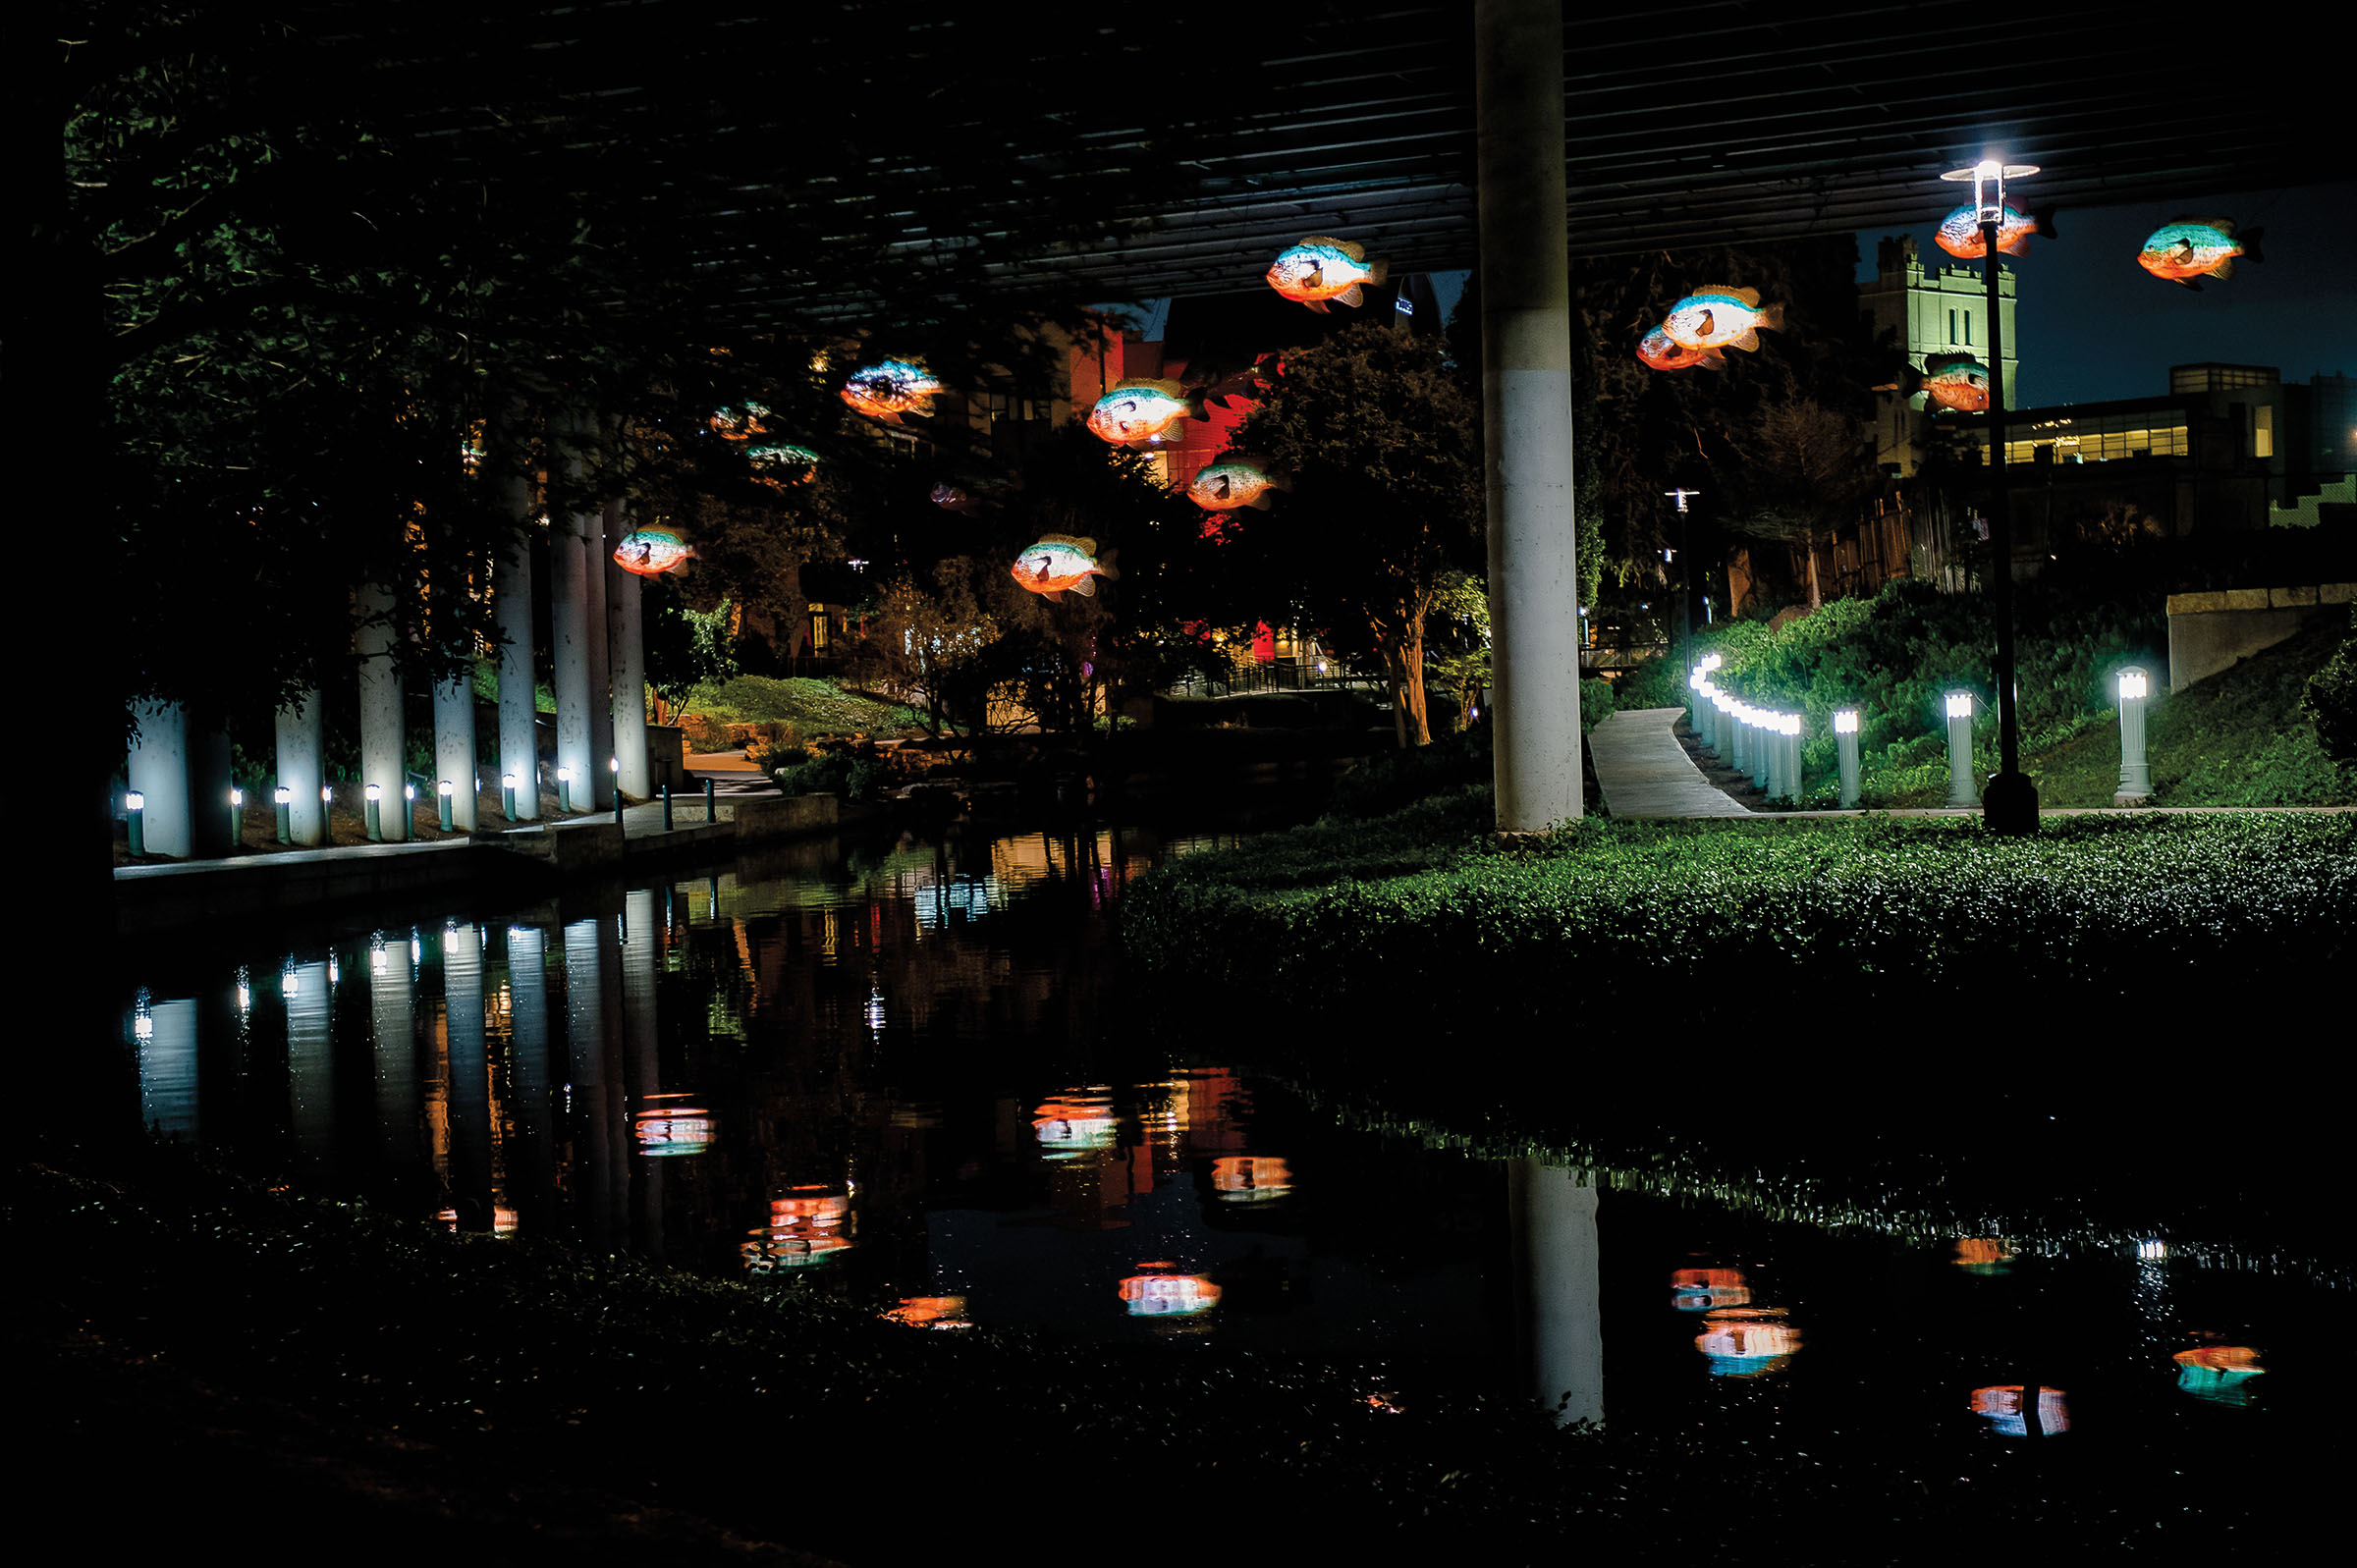 Brightly illuminated blue and gold fish sculptures light up above the water under a concrete overpass